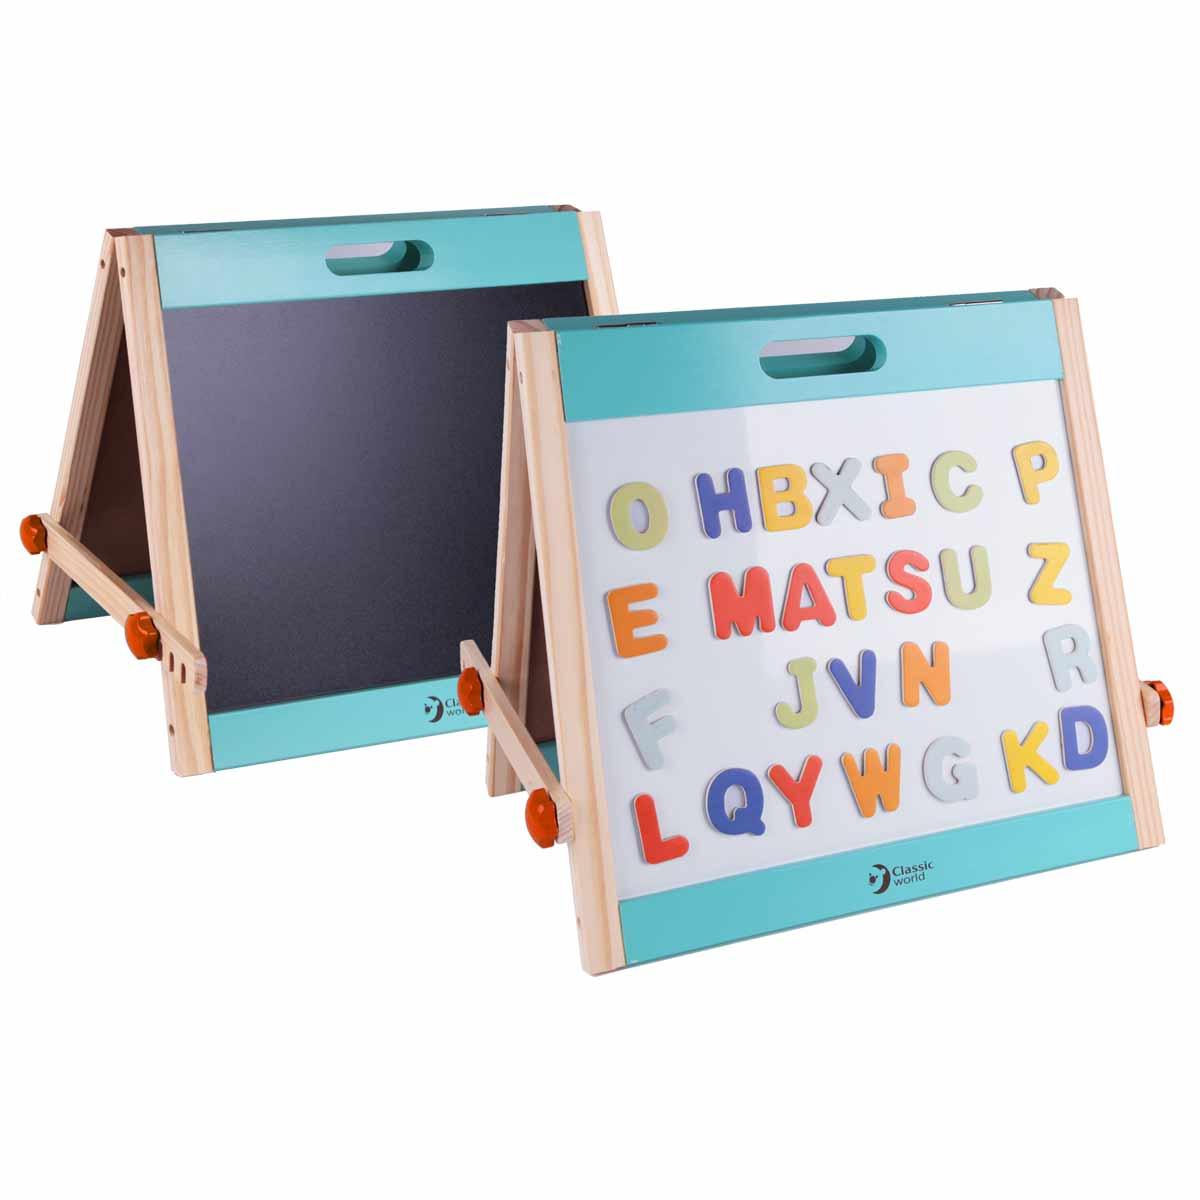 Table drawing board and with magnetic letters - MoonyBoon